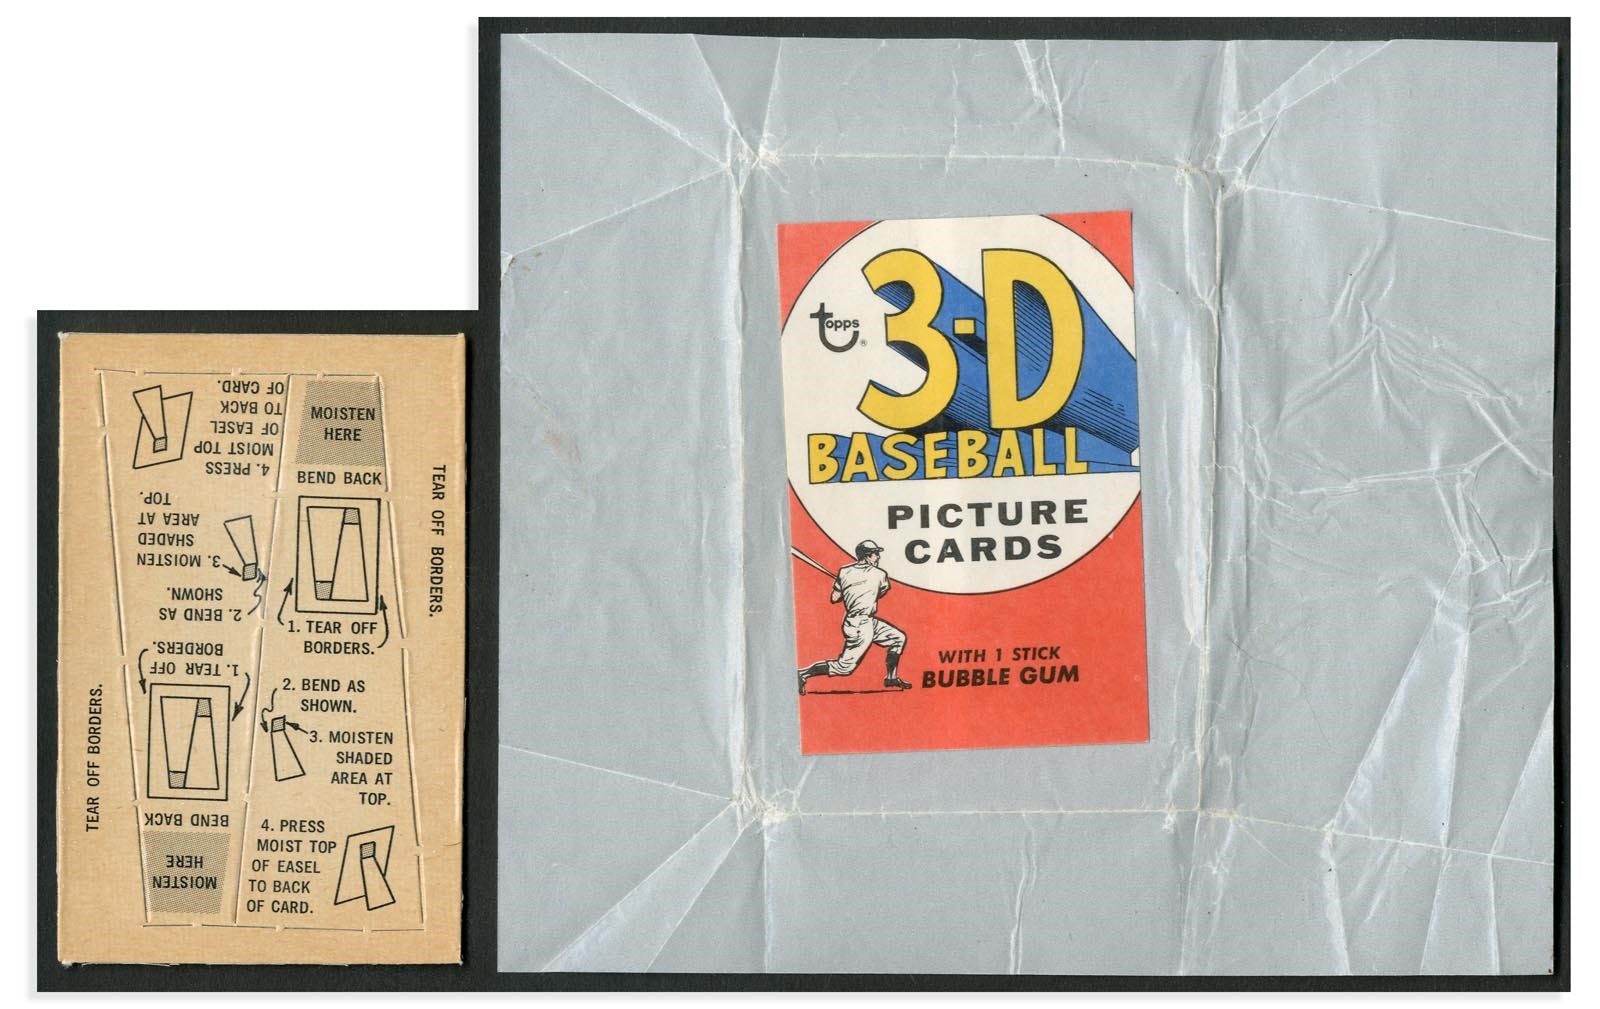 Baseball and Trading Cards - 1968 Topps 3D Baseball Test Issue Wrapper and RARE Stiffener (2)